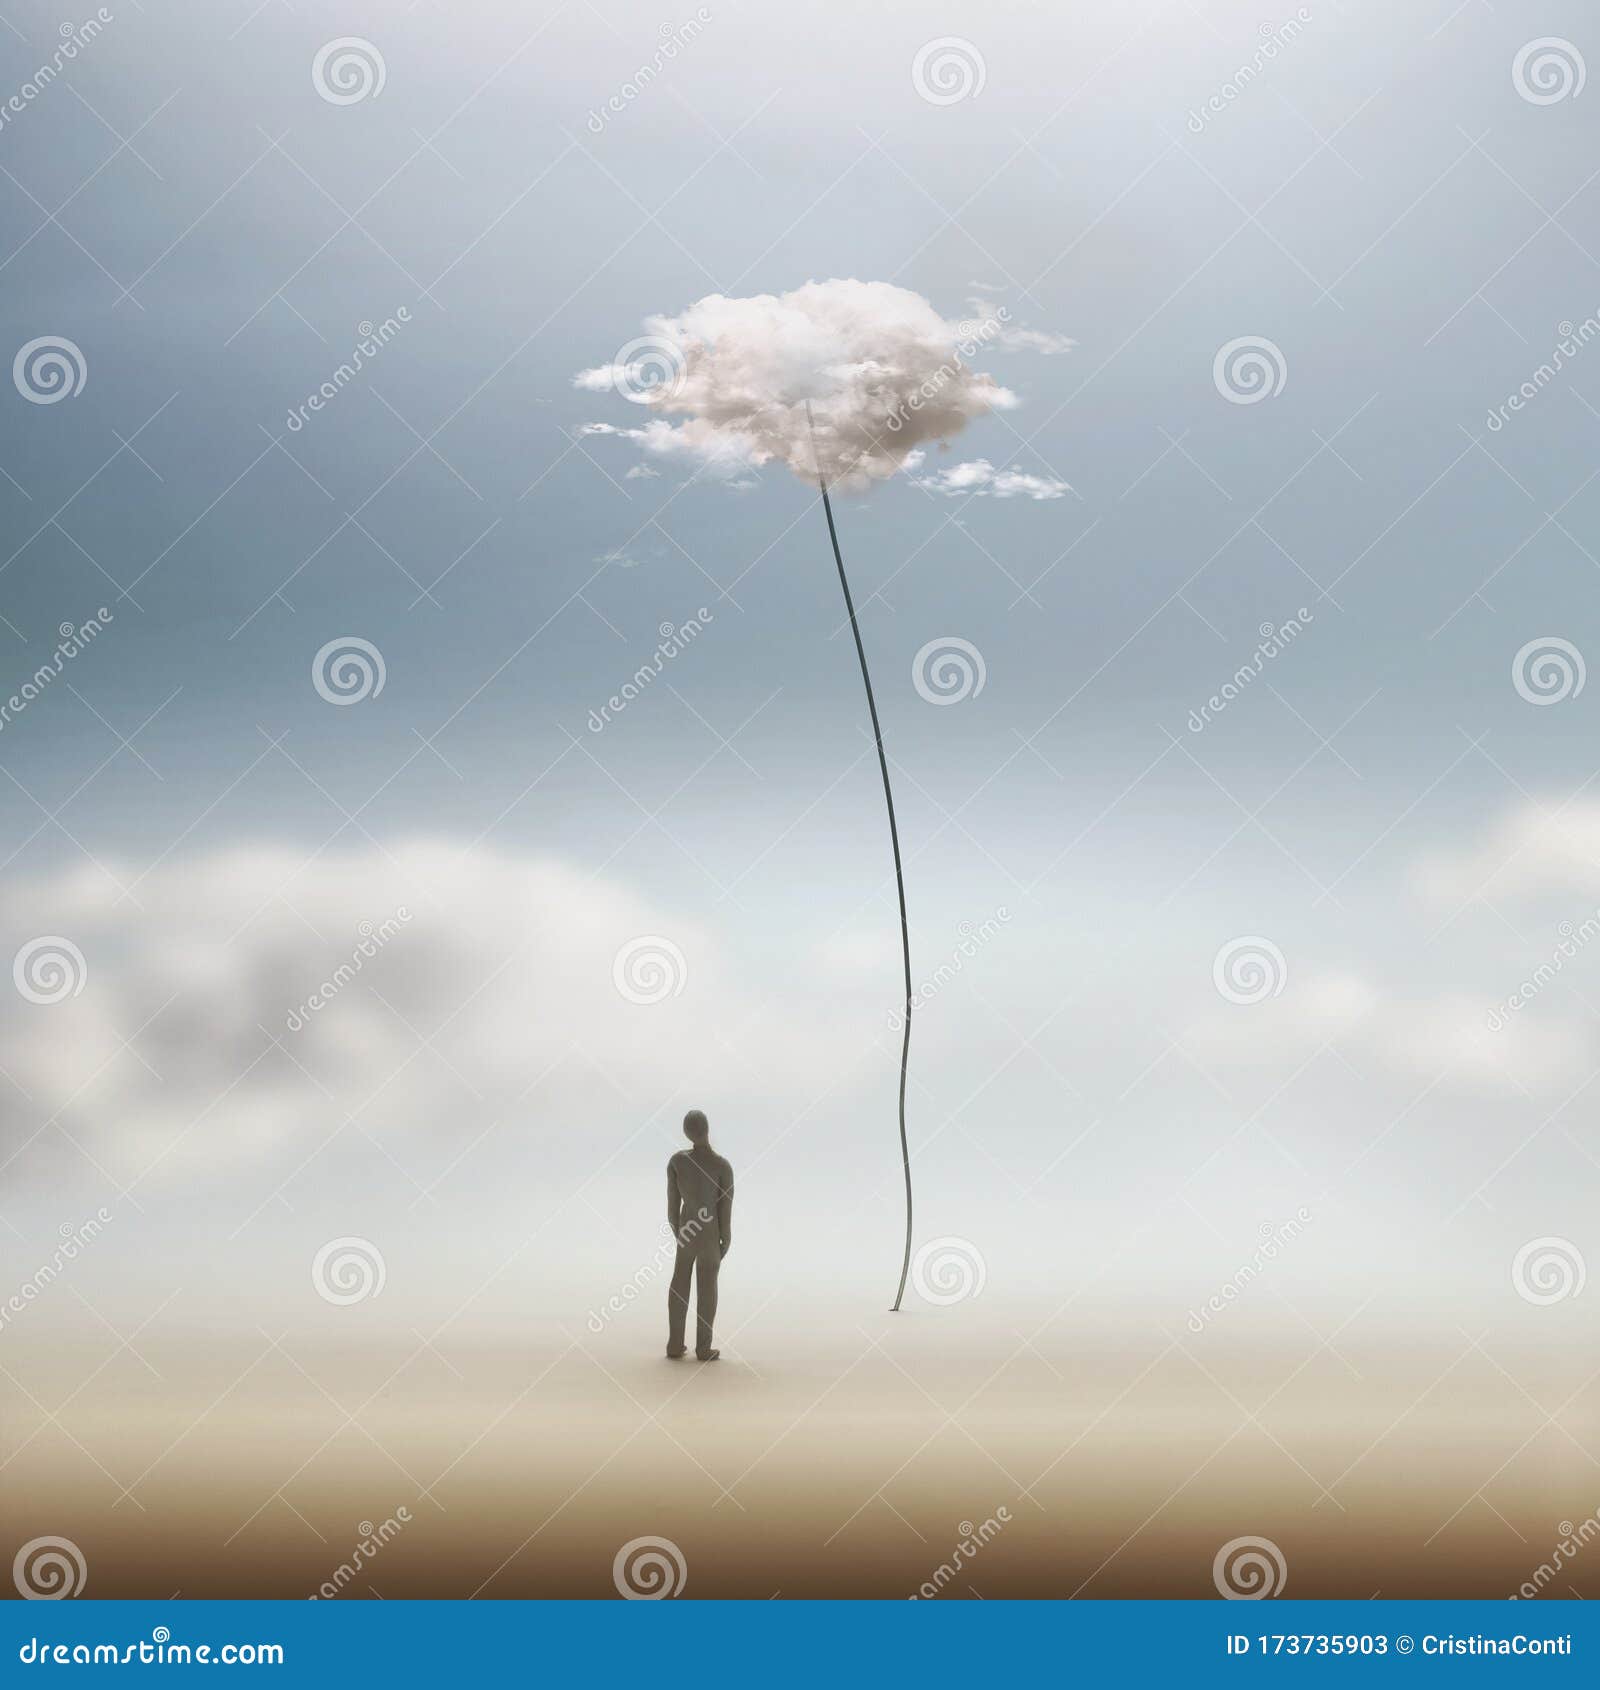 man observes a surreal cloud attached to the ground with a thread